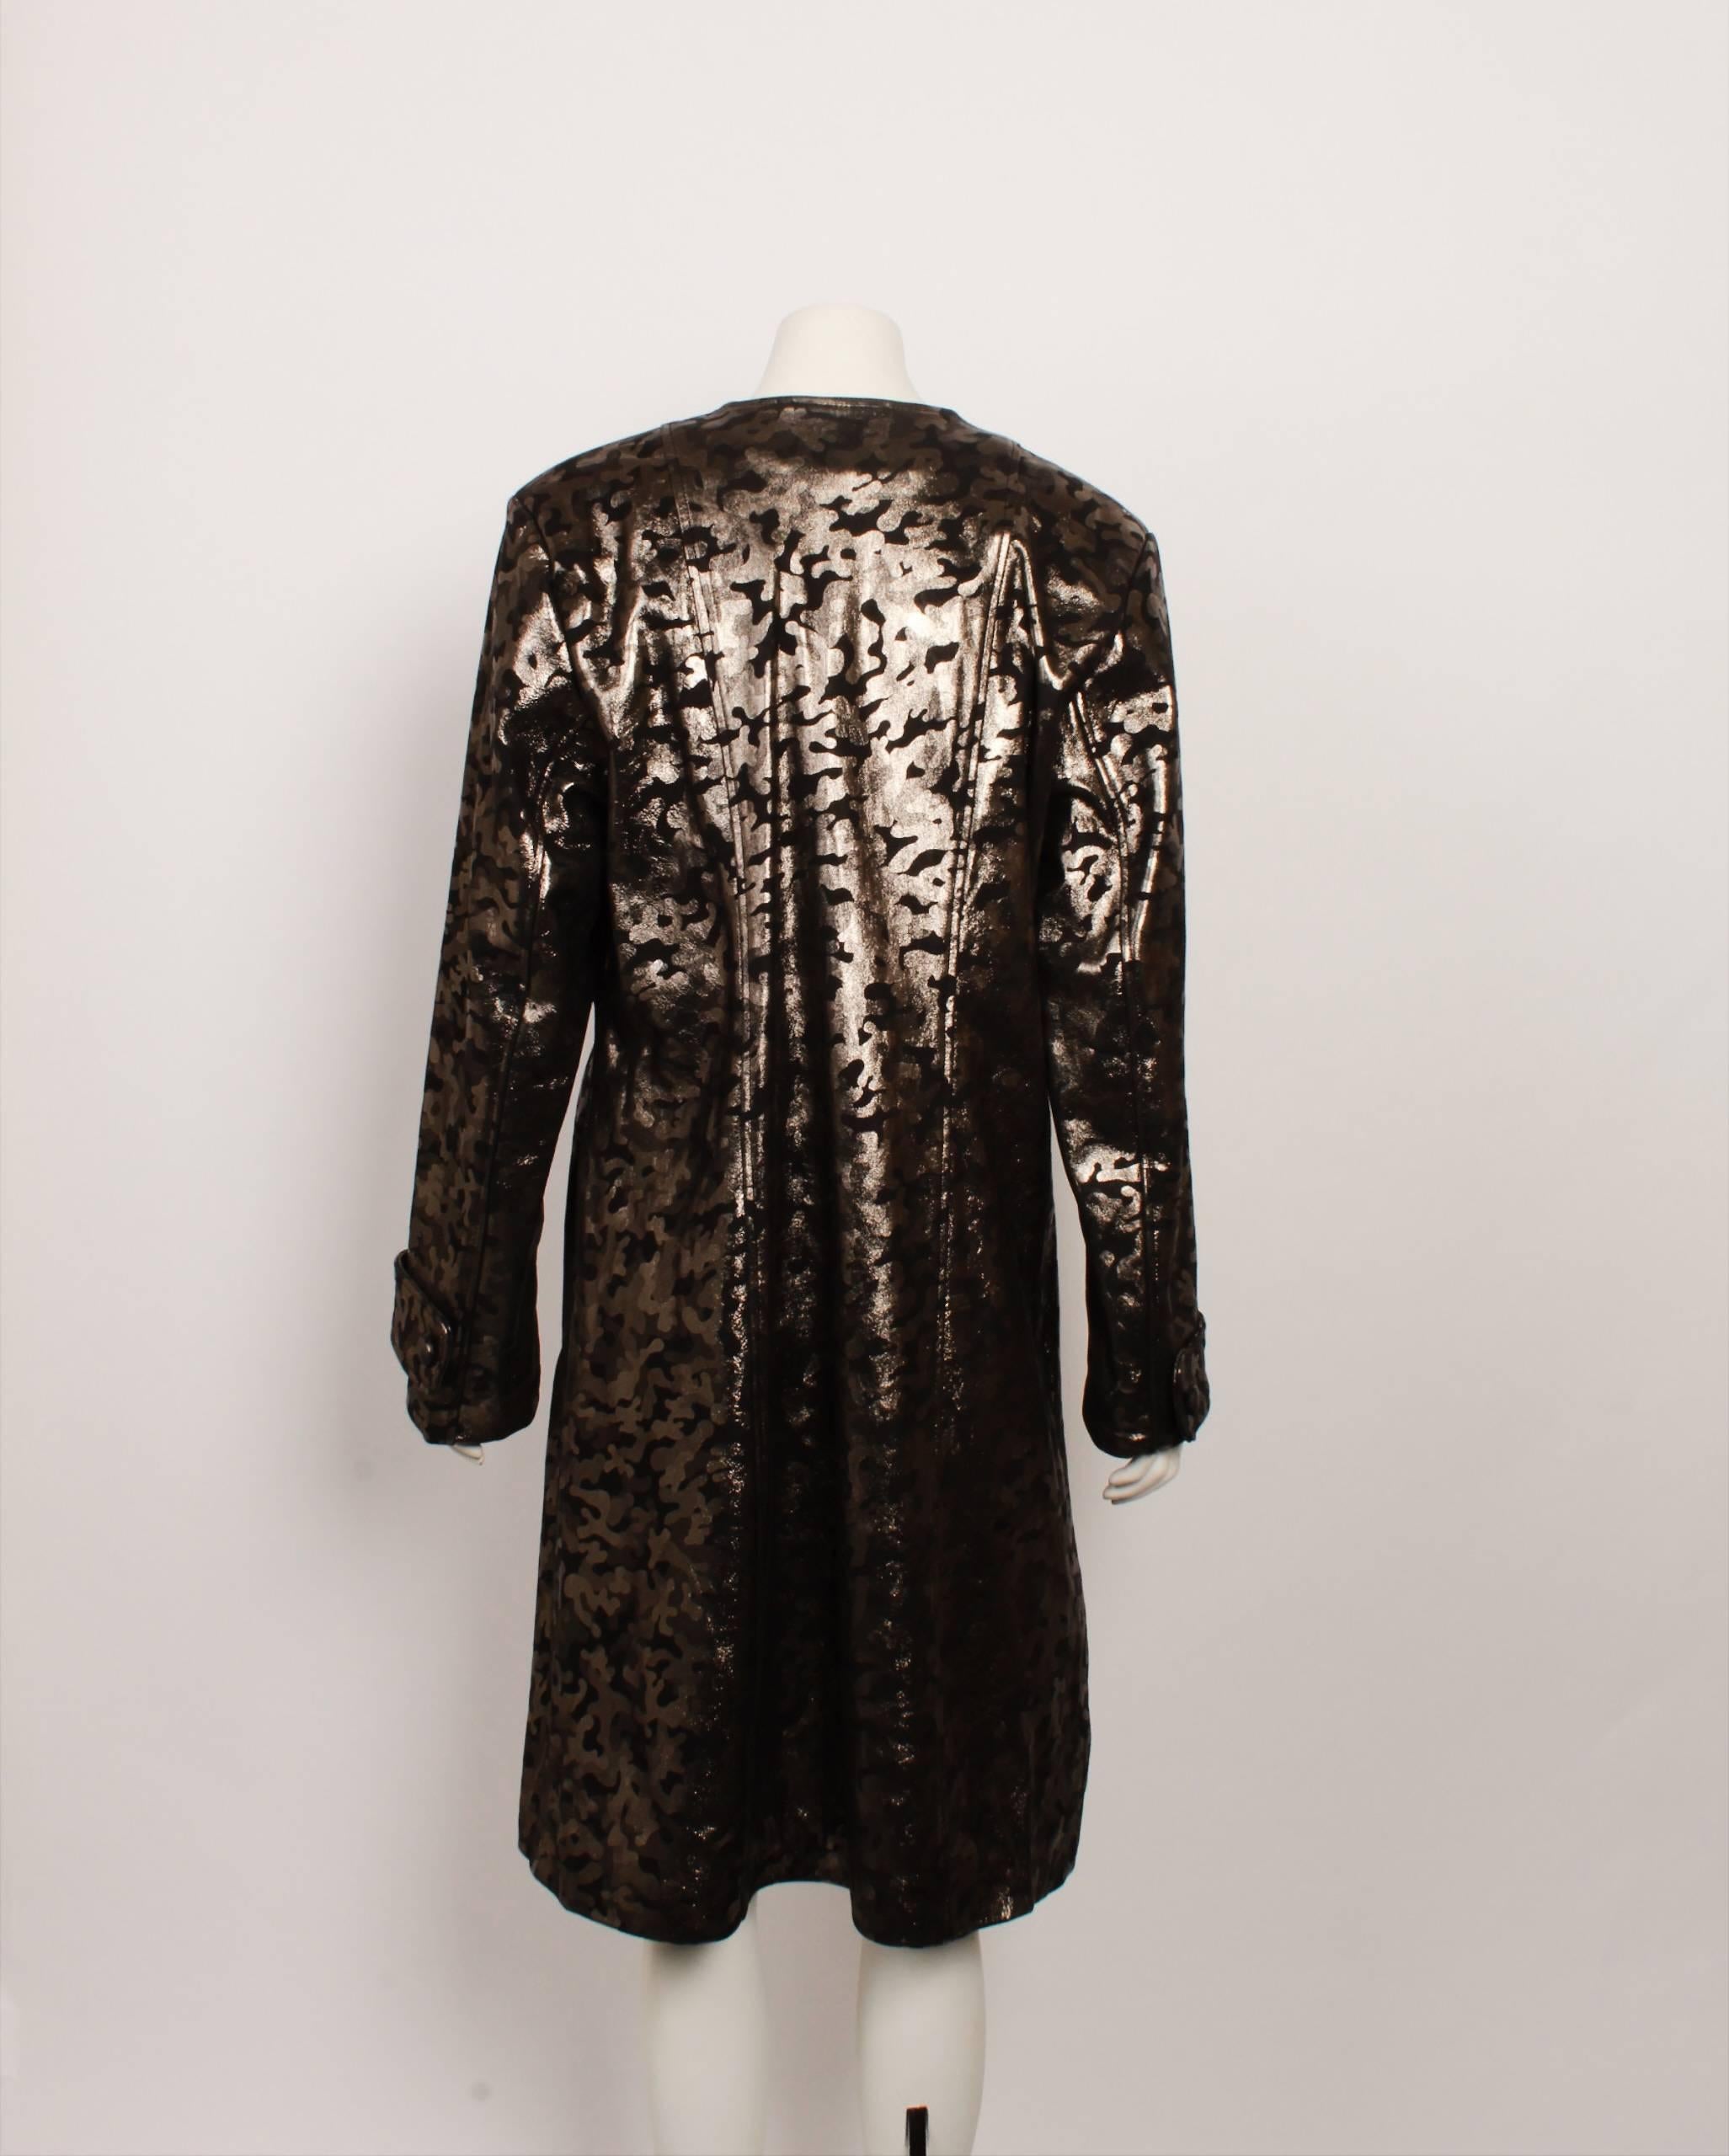 Vintage Leather Metallic Coat In Excellent Condition For Sale In Melbourne, Victoria